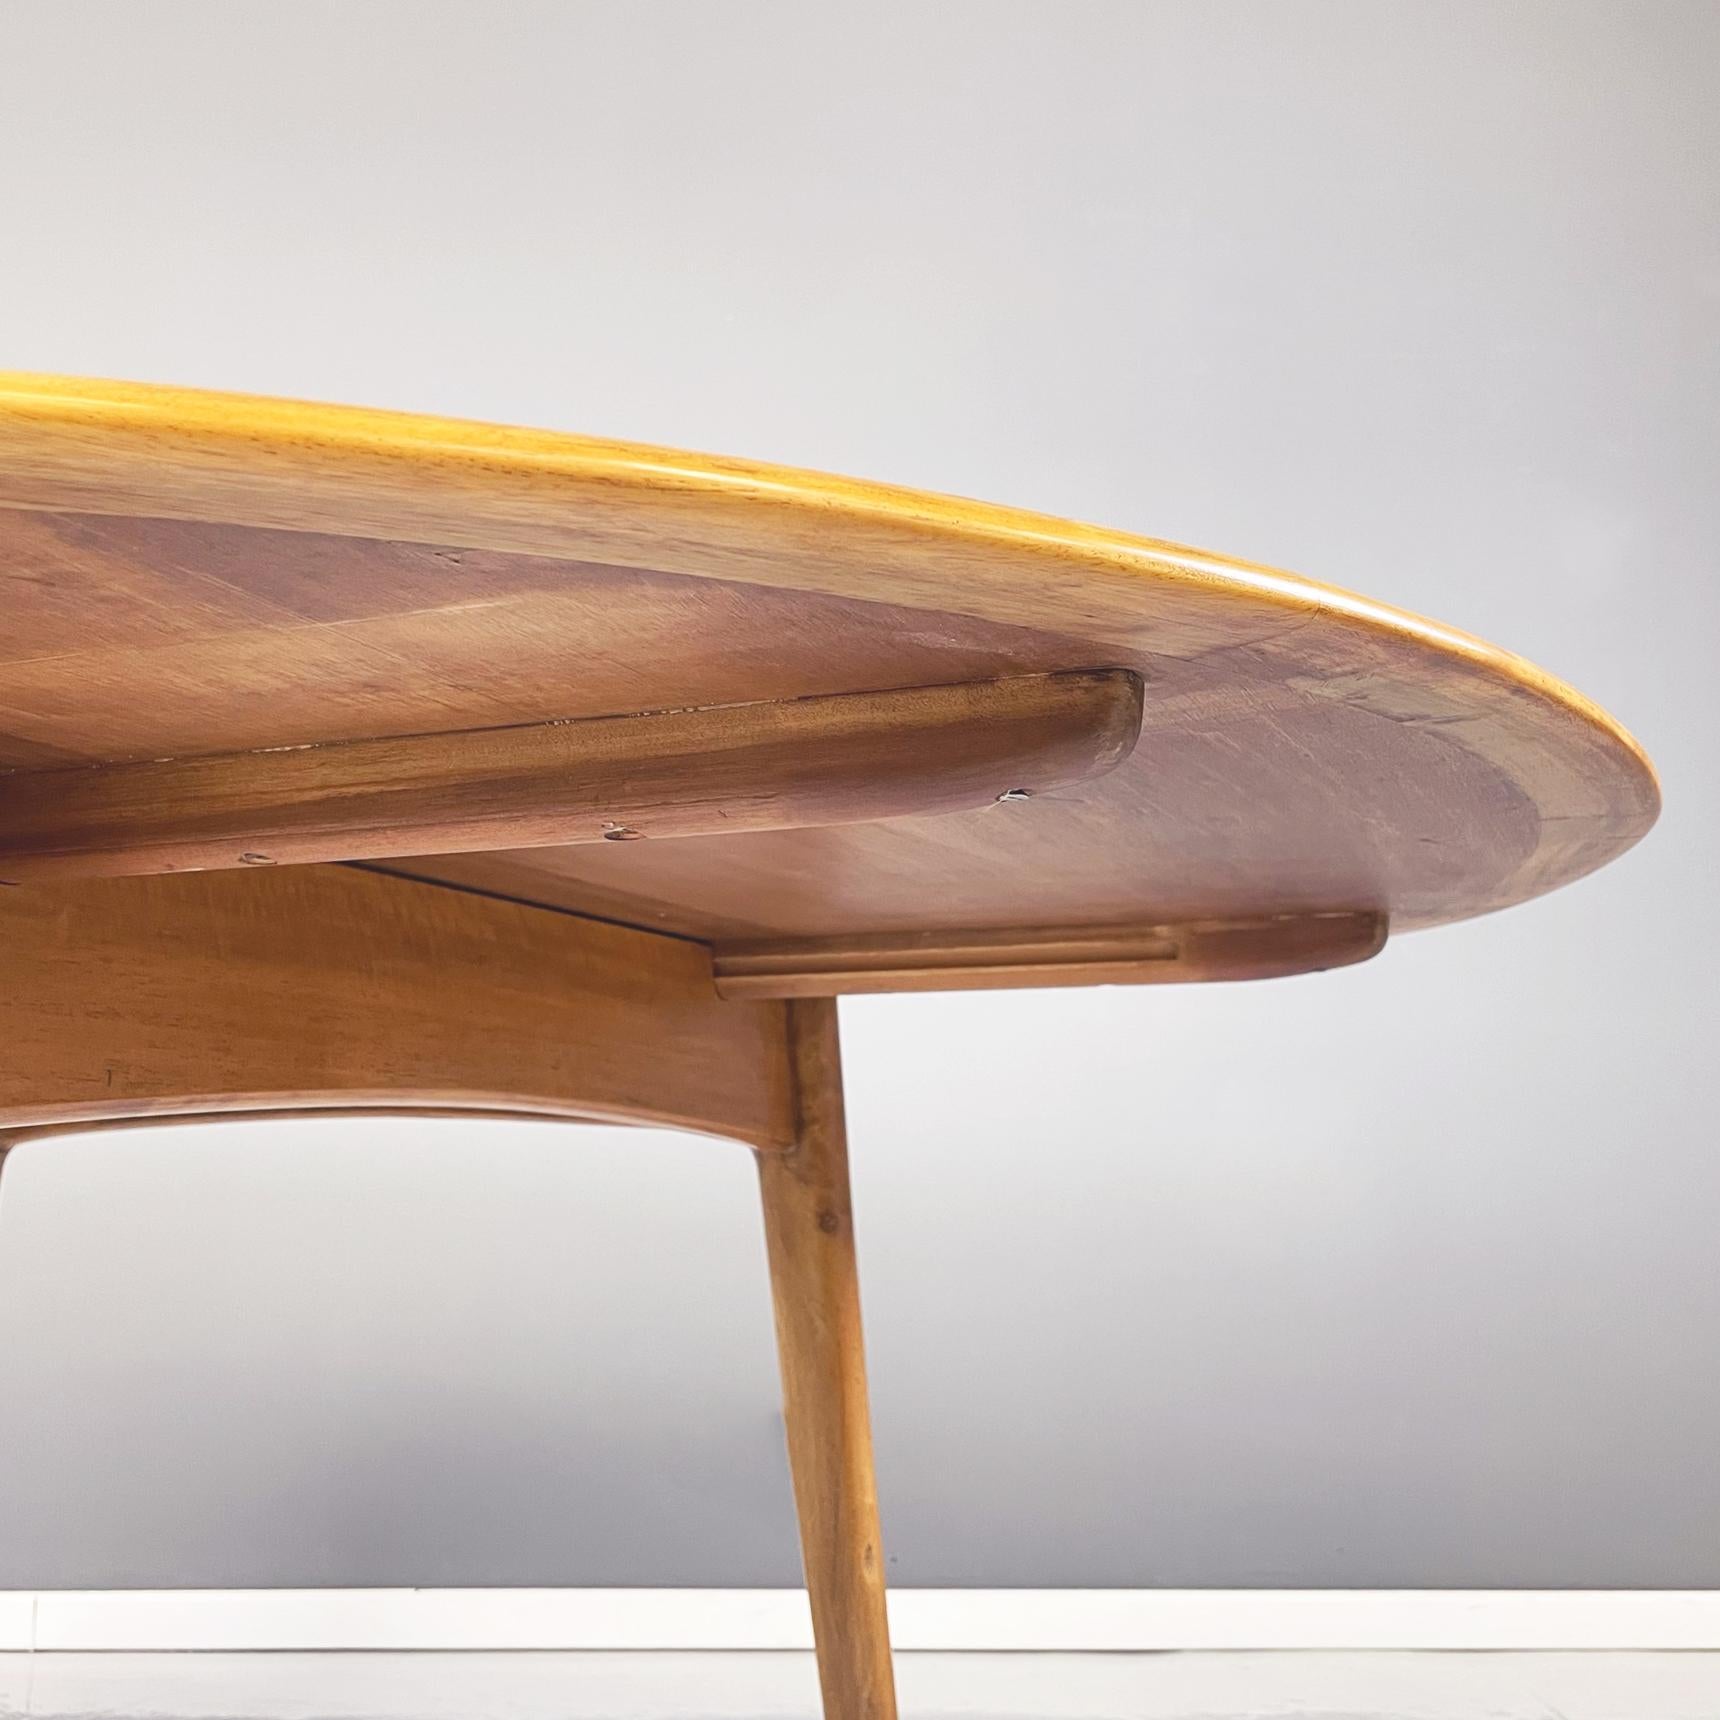 North Europa Midcentury Oval Round Wooden Dining Table with Extensions, 1960s 7